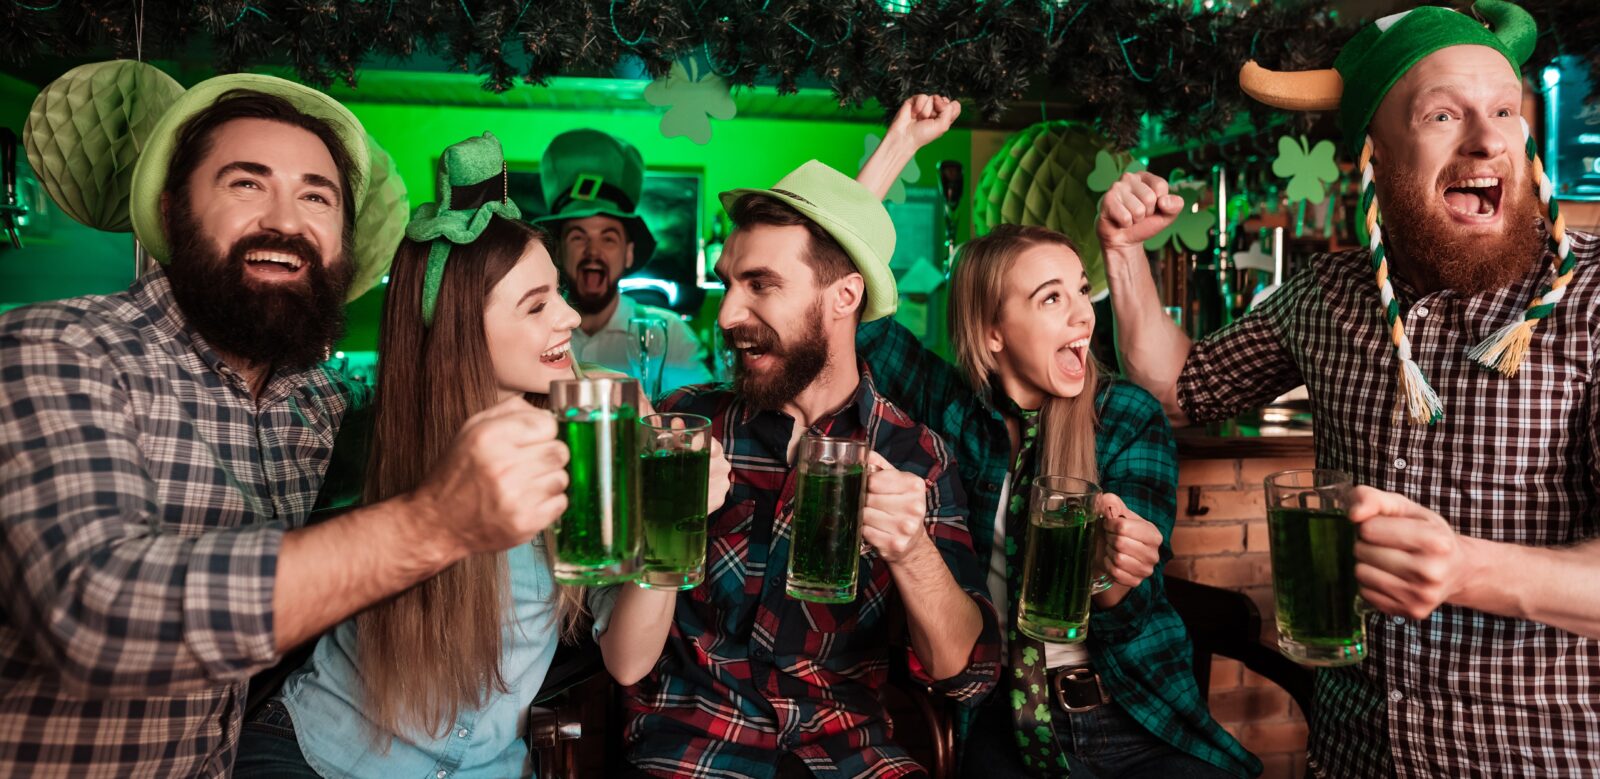 Do The Almost St. Patty’s Day Pub Crawl in {{mpg_city}}!